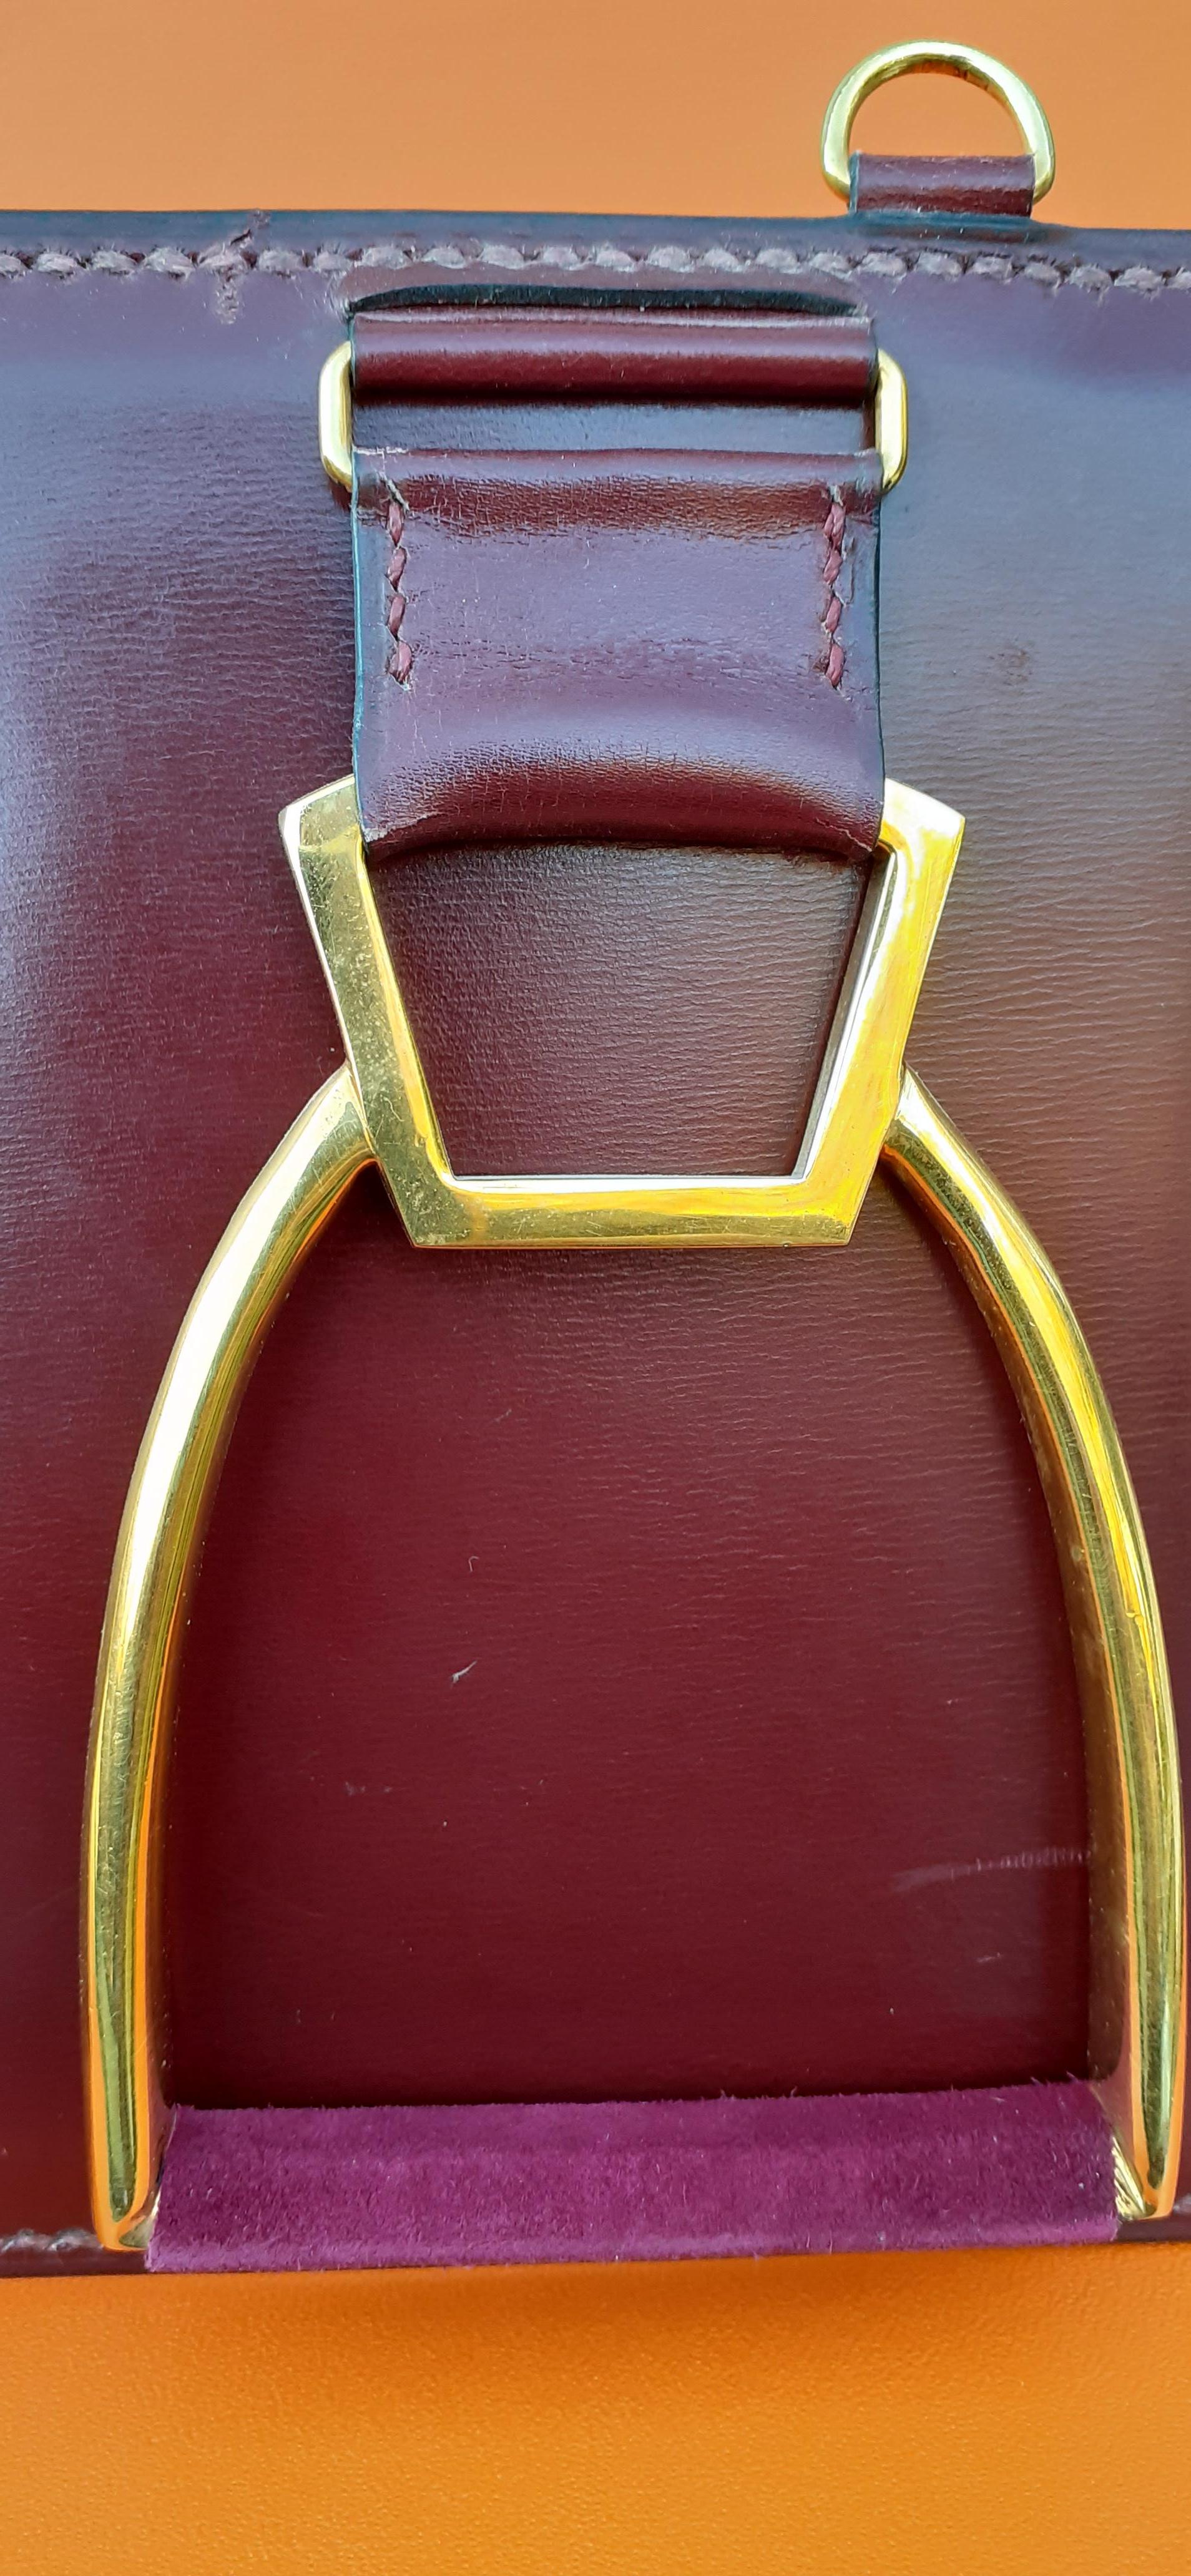 Exceptional Hermès Tie Hanger Tie Rack 3 Stirrups in Metal and Leather For Sale 1